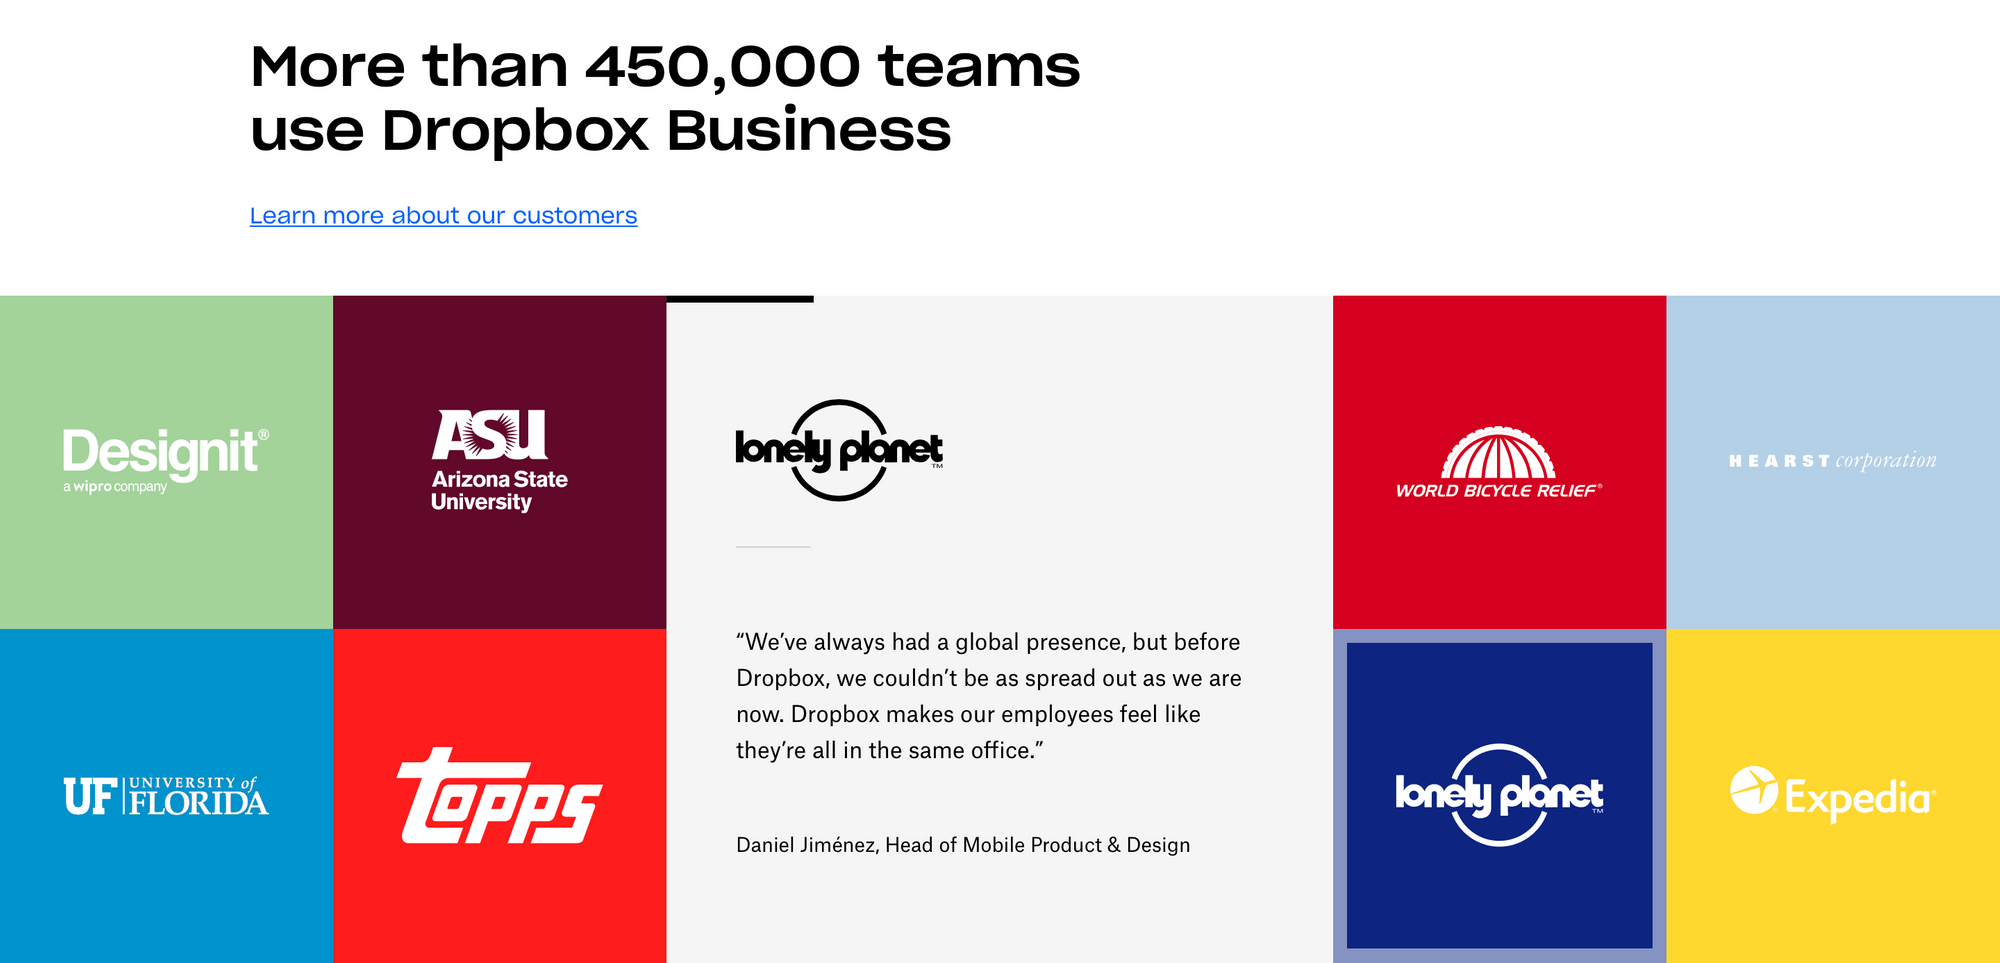 Third parties endorsement from customers, example of Dropbox website. More than 450.000 teams use Dropbox Business. Learn more about our customers: Designit, ASU (Arizona State university), UF ( University of Florida), Tops, Lonely Planet,  World Bicycle Relief, Hearst, Expedia.